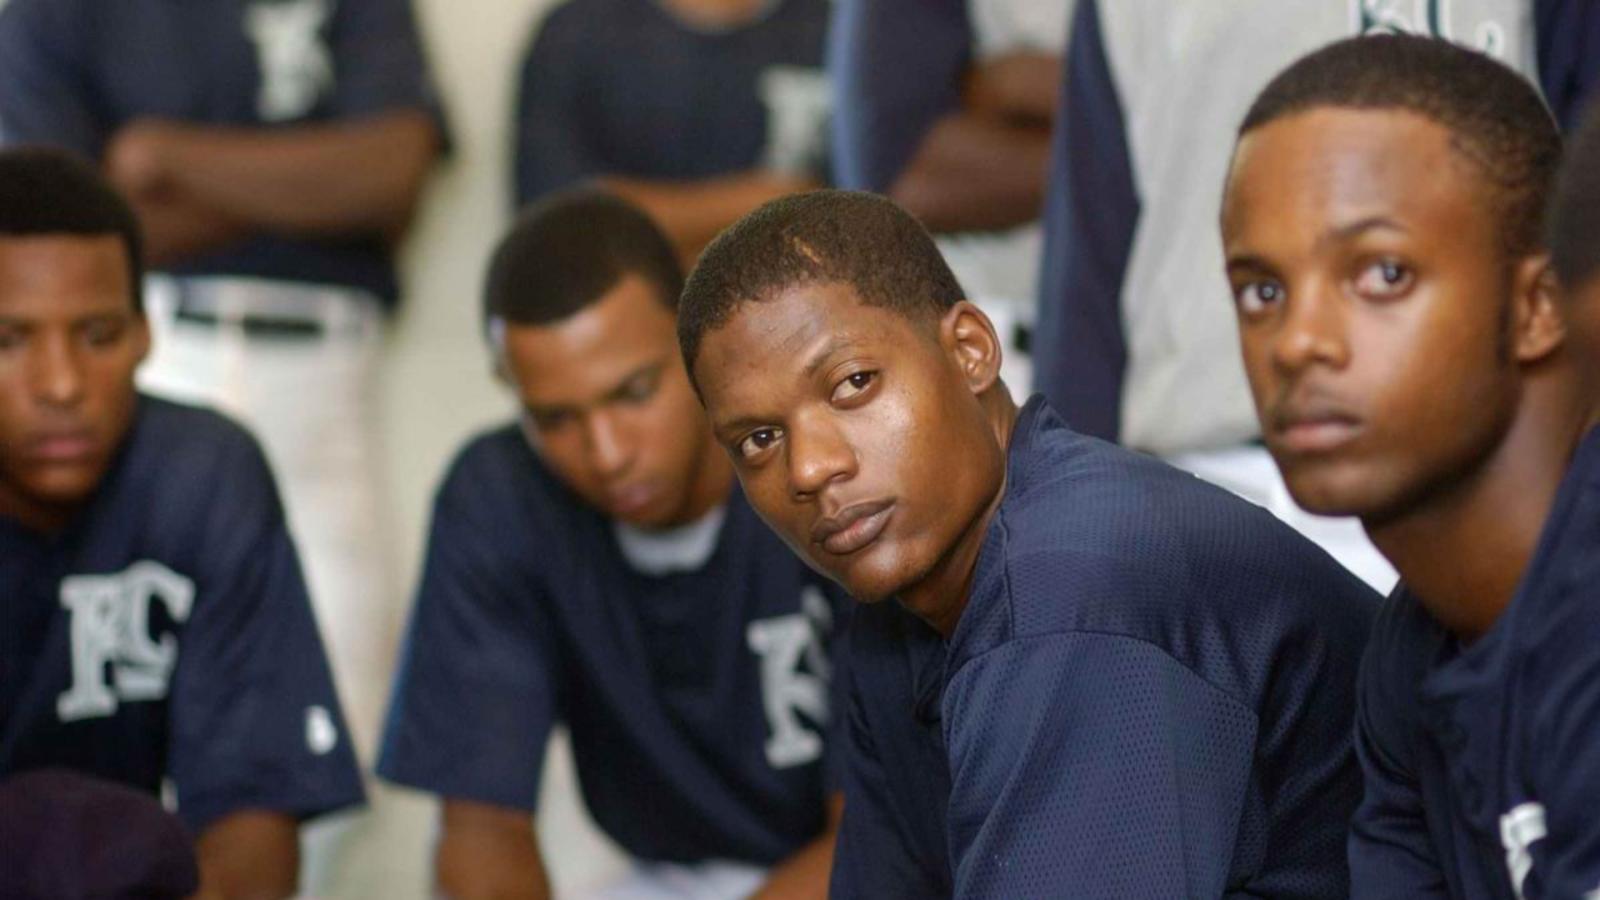 10 Sports Movies That Are About So Much More Than Just Game - image 3